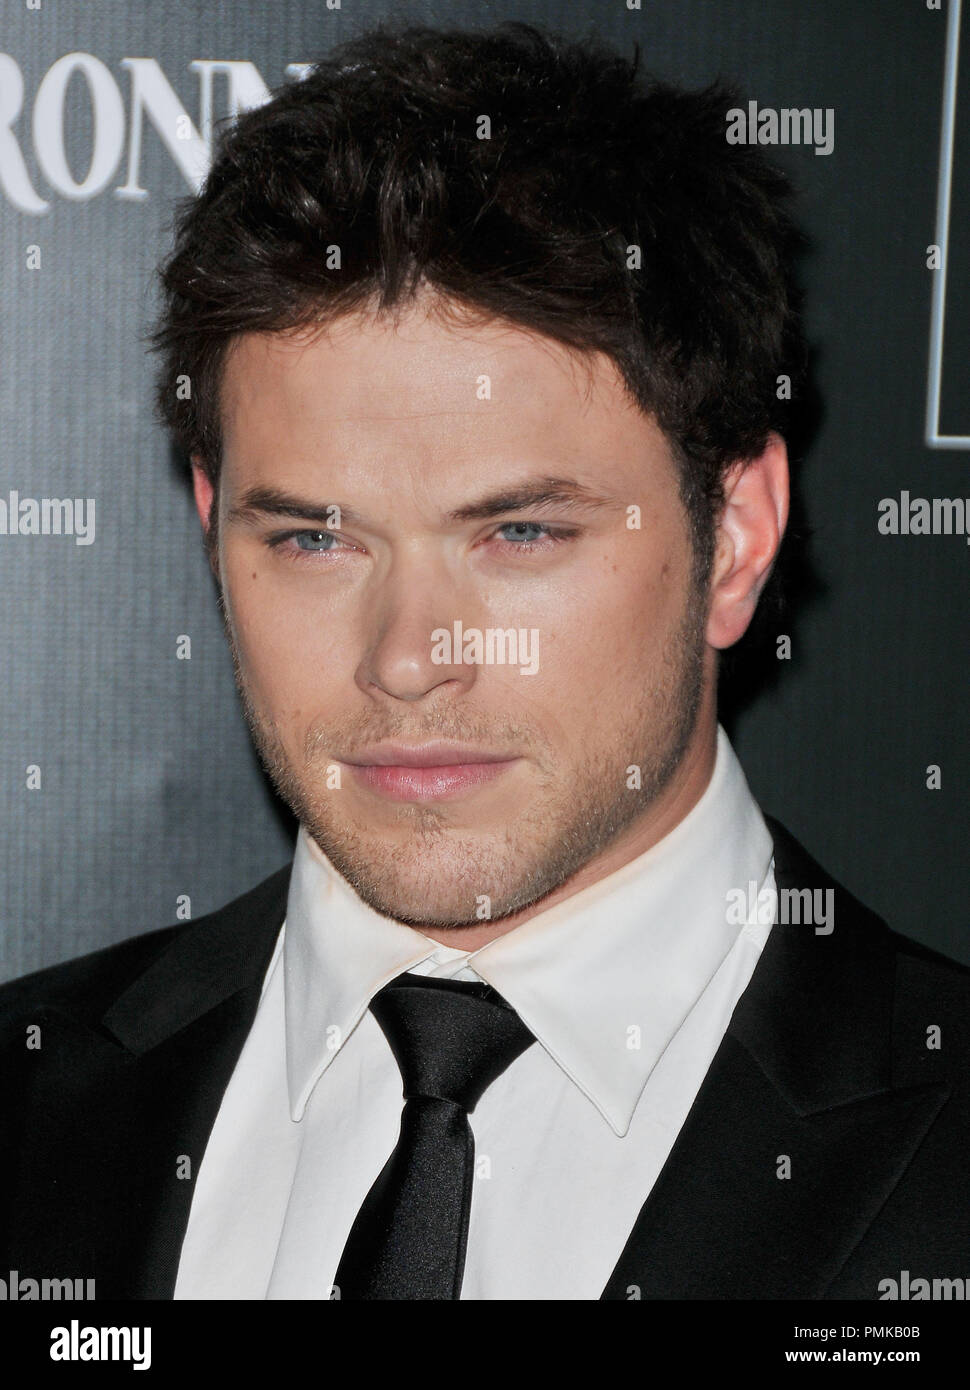 Kellan Lutz at the 13th Annual Costume Designers Guild Awards held at The Beverly Hilton Hotel in Beverly Hills, CA. The event took place on Tuesday, February 22, 2011. Photo by PRPP Pacific Rim Photo Press / PictureLux Stock Photo